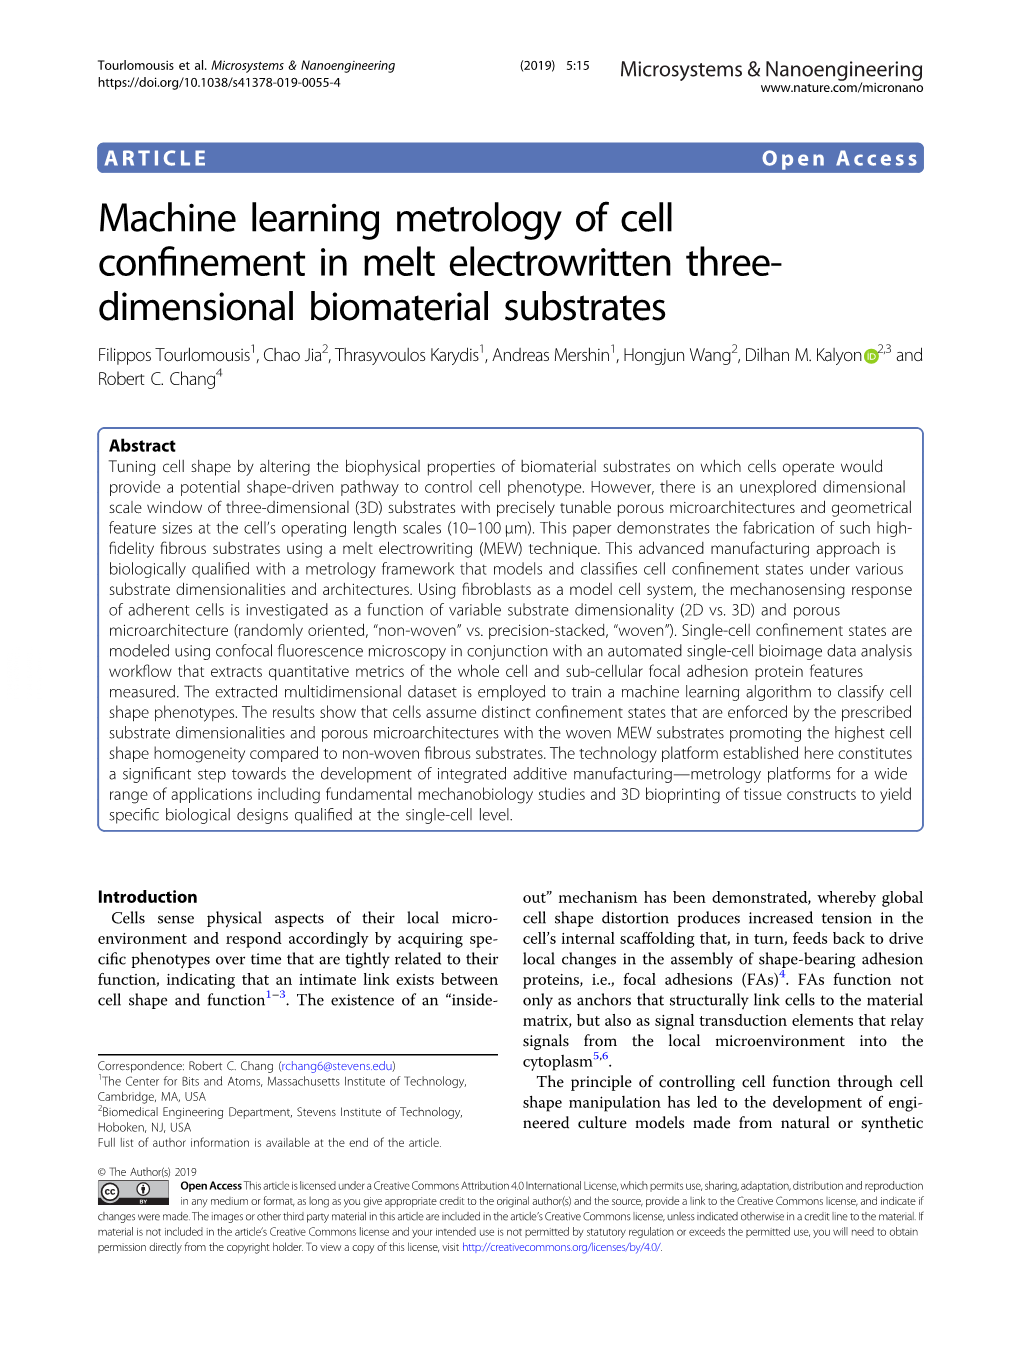 Machine Learning Metrology of Cell